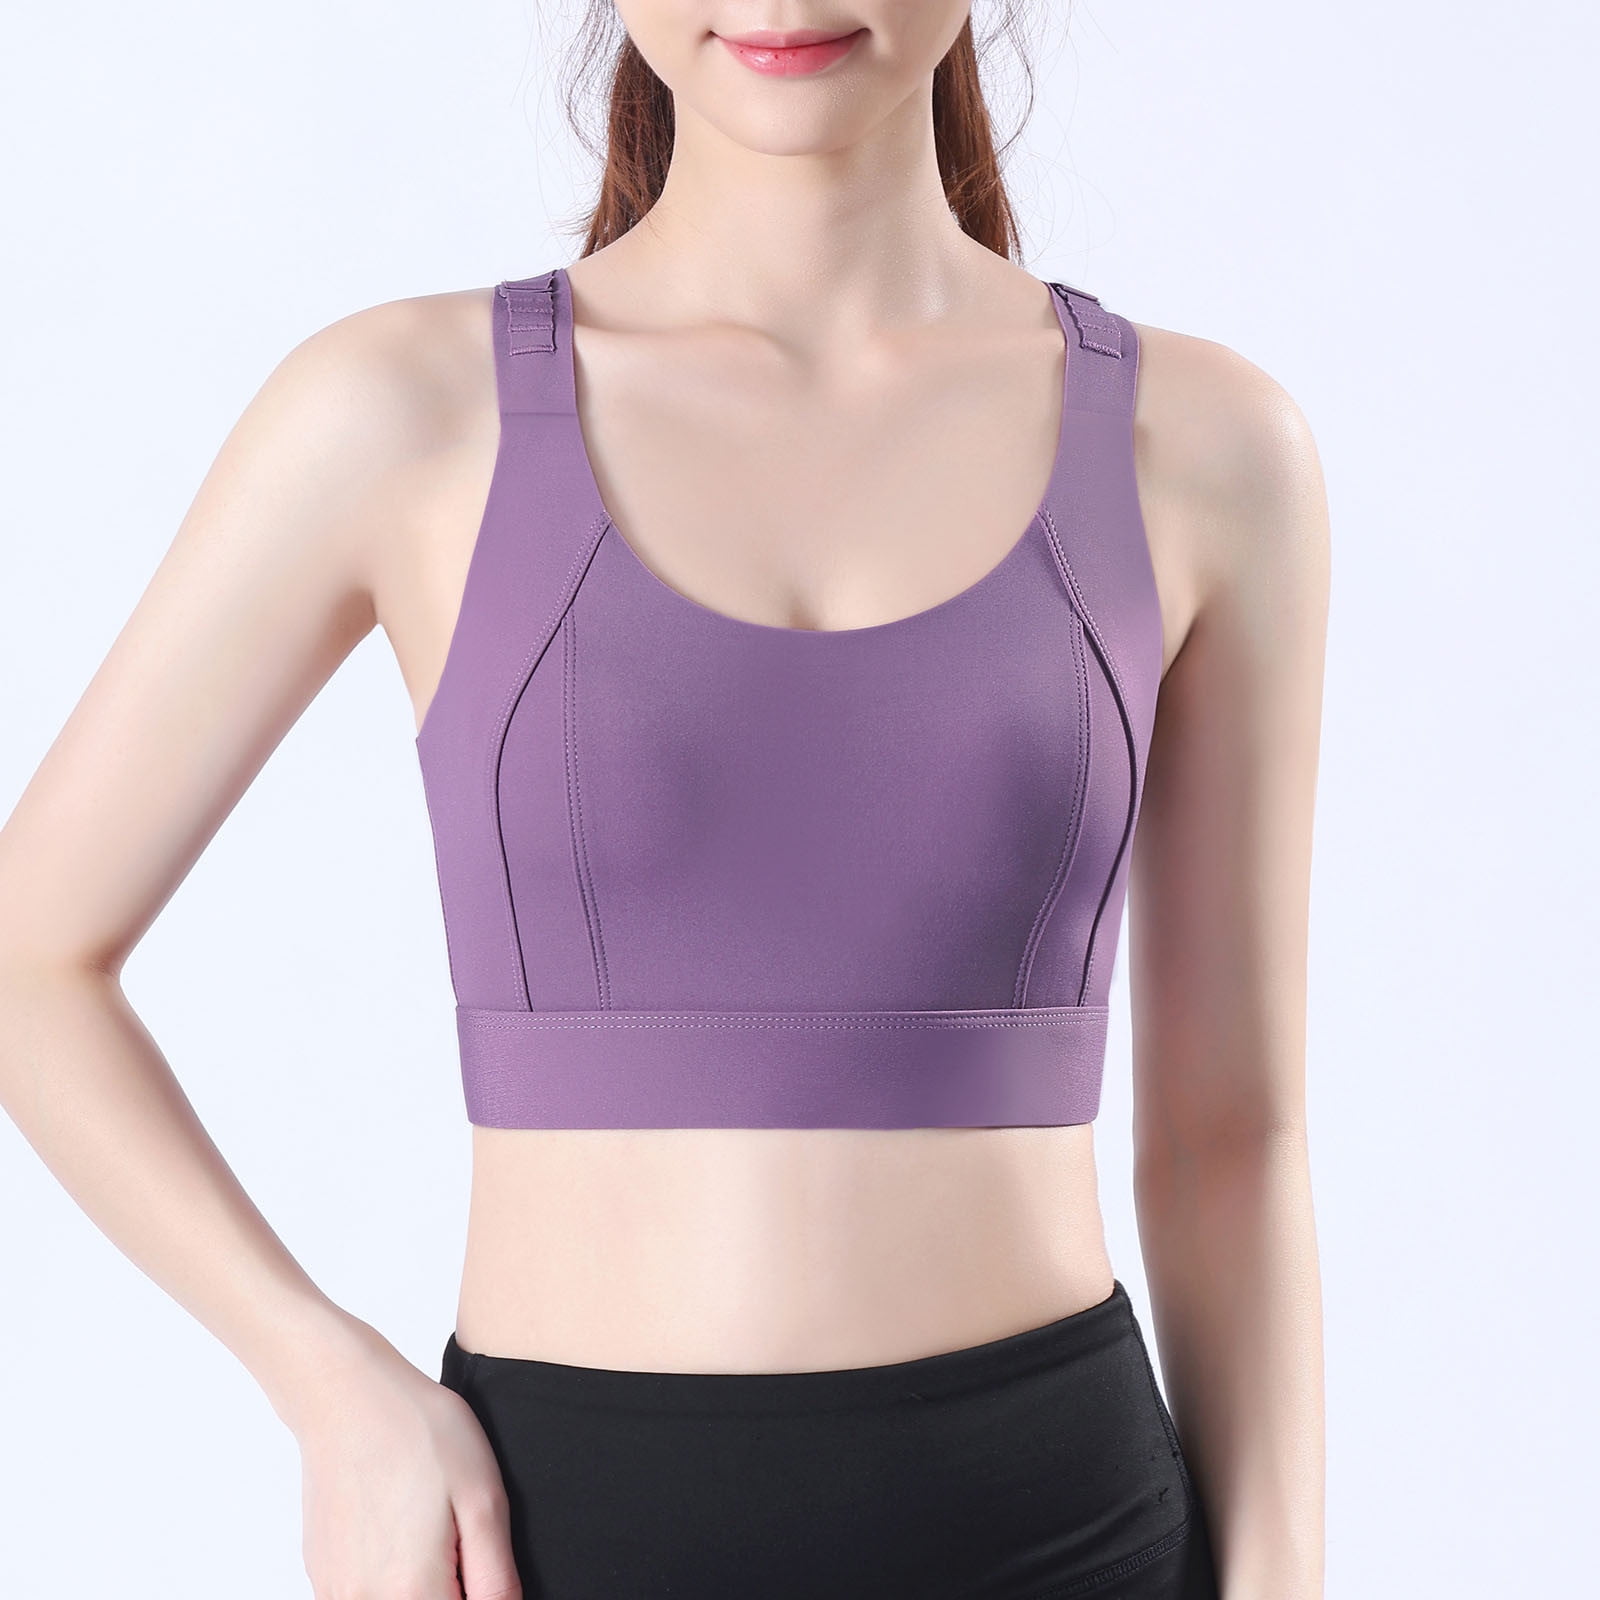 Aueoeo Compression Bra for Women, Women's Removable Padded Yoga Tank Tops  Sports Bras Sleevsless Shockproof Fitness Workout Running Crop Tops Yoga